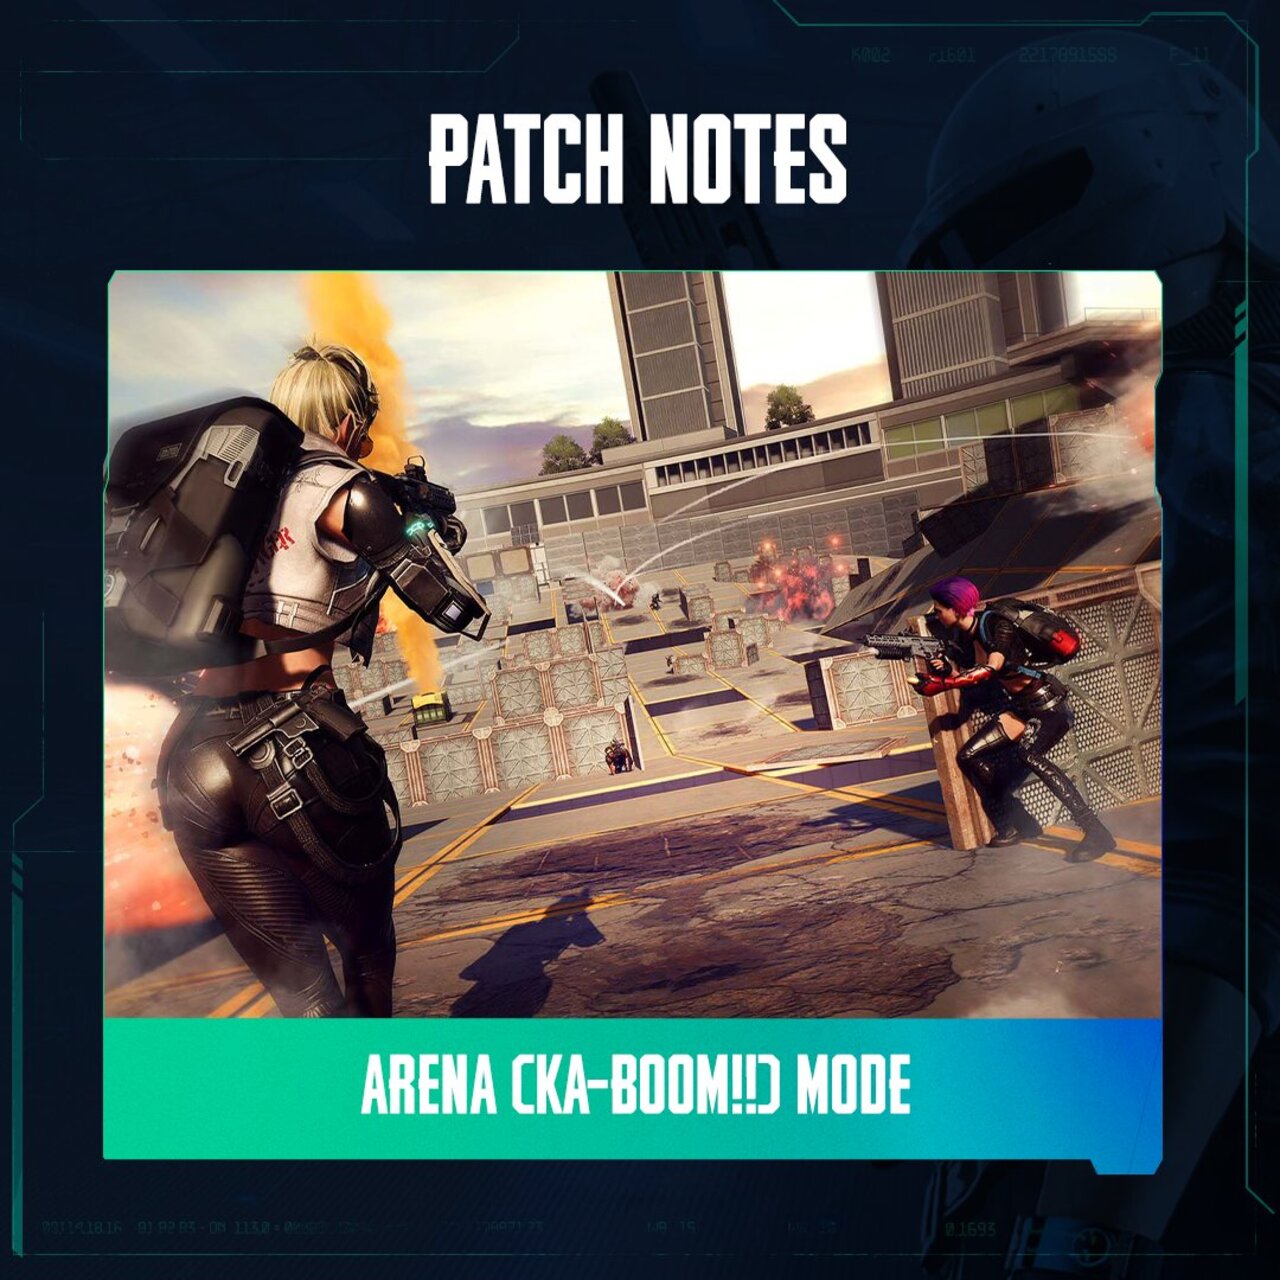 NEW STATE MOBILE v0.9.46 Patch Notes: The PUBG New State March update comes with a new mode, and a lot of new content